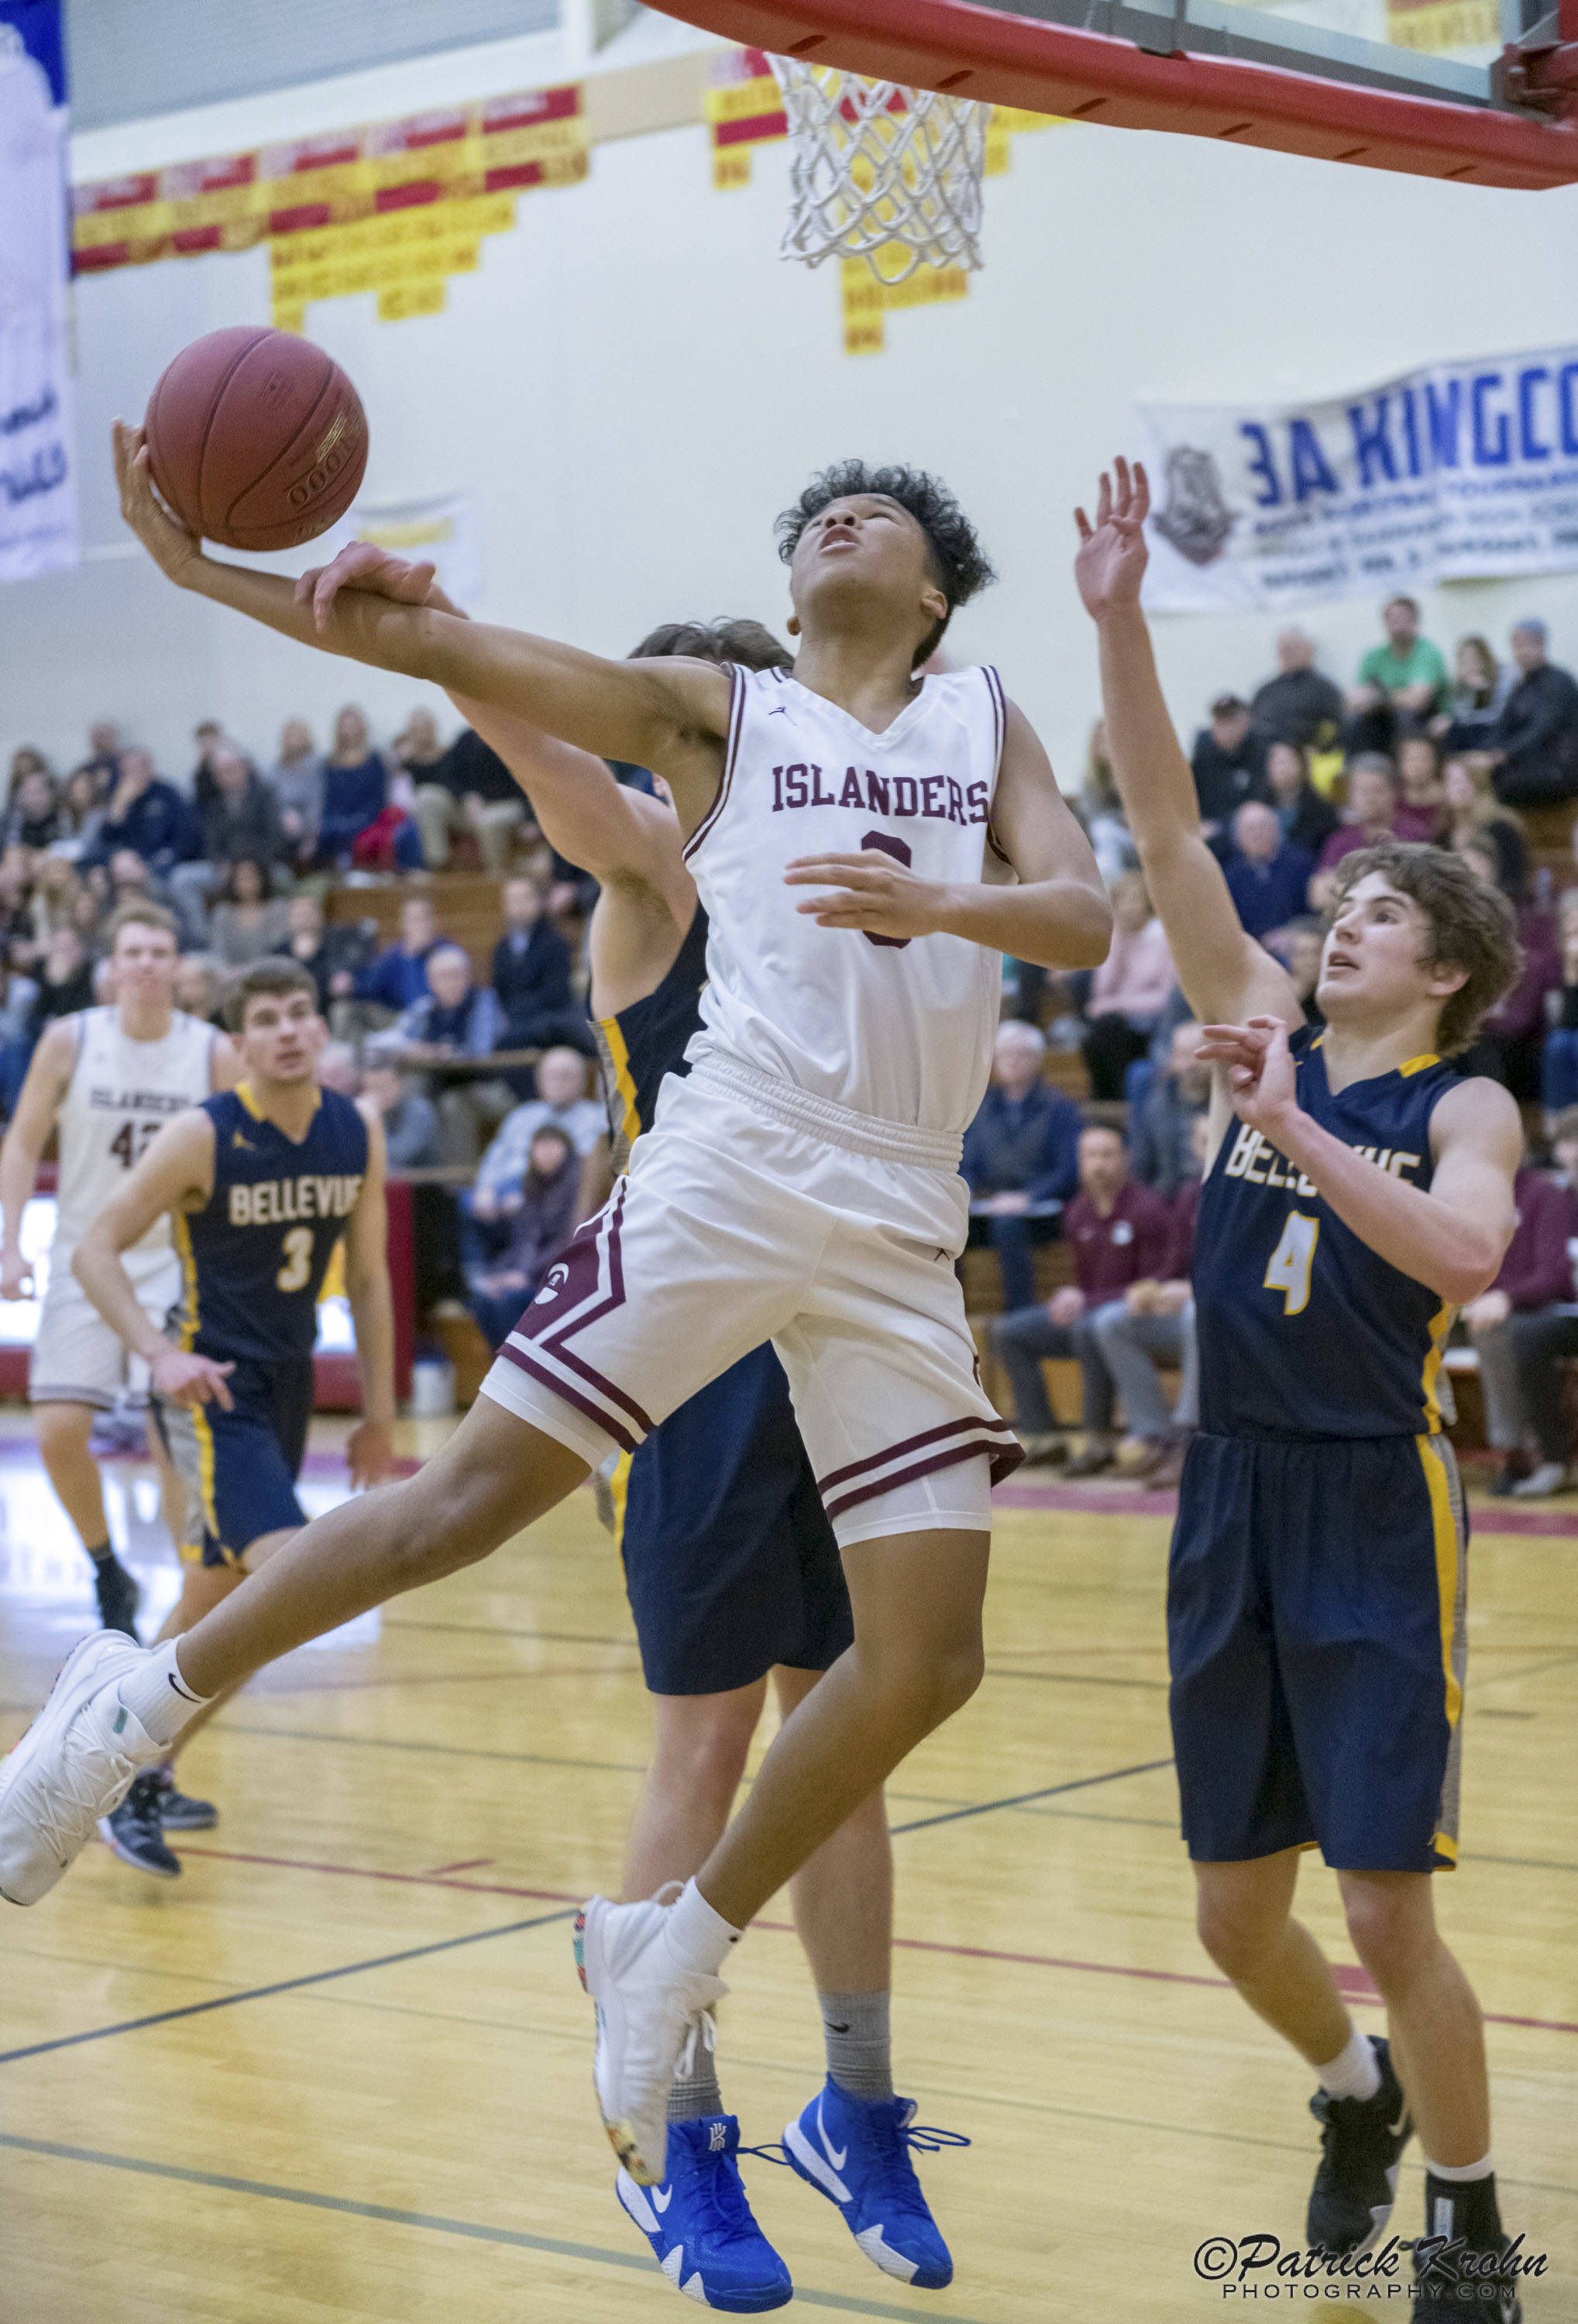 Mercer Island Islanders freshman Chris Clark (pictured) drives to the hoop in the fourth quarter against the Bellevue Wolverines in the 3A KingCo tournament championship game on Feb. 6 at Newport High School in Factoria. The Islanders defeated the Wolverines 44-41. Photo courtesy of Patrick Krohn/Patrick Krohn Photography